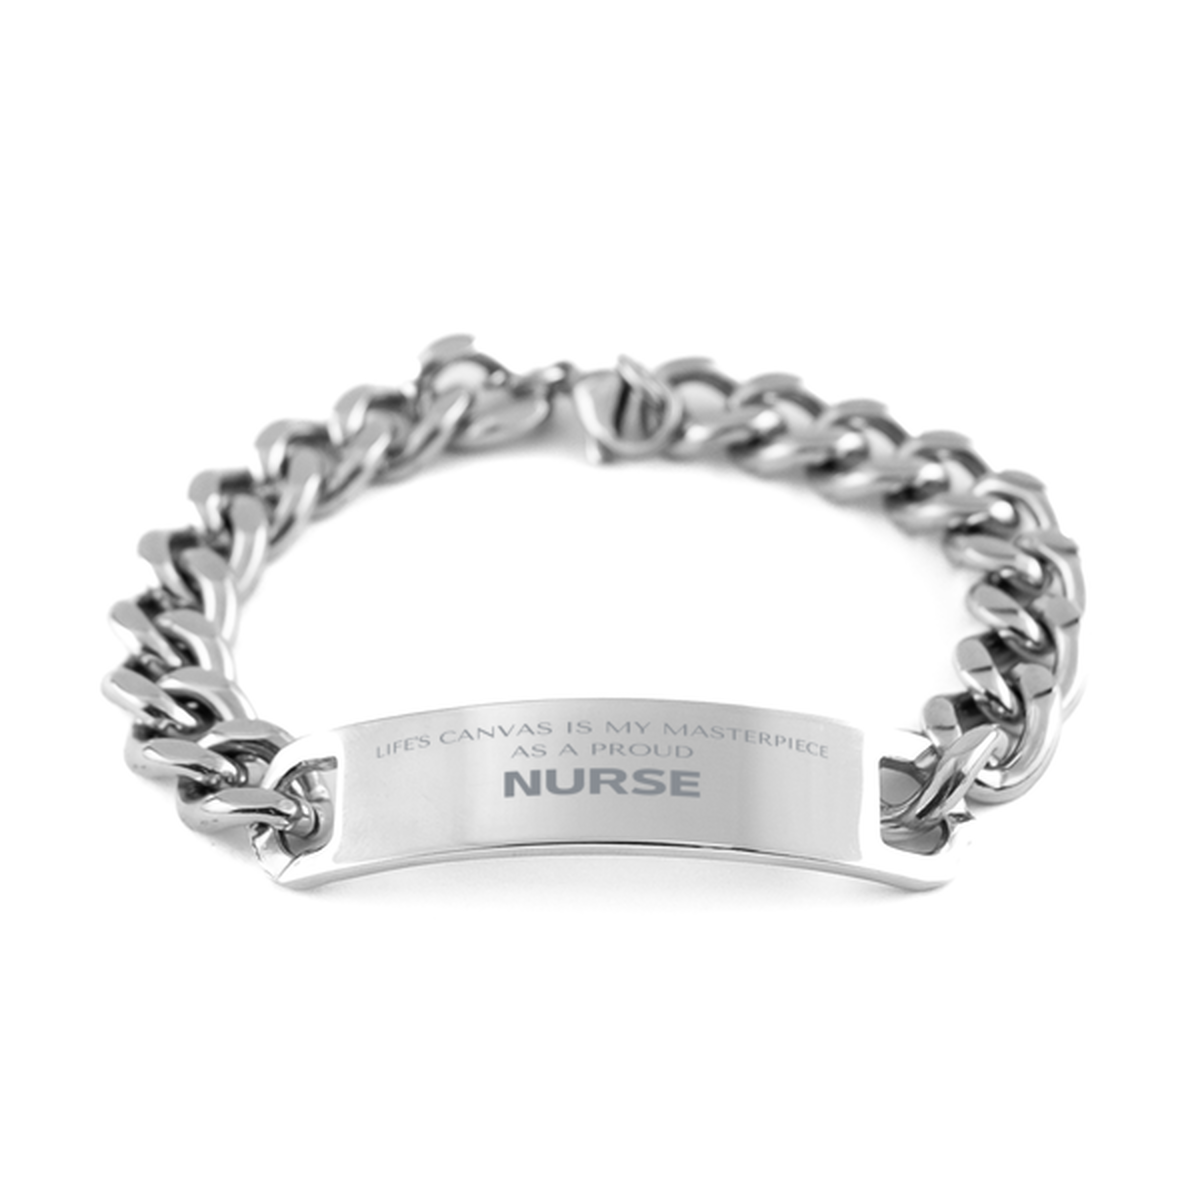 Proud Nurse Gifts, Life's canvas is my masterpiece, Epic Birthday Christmas Unique Cuban Chain Stainless Steel Bracelet For Nurse, Coworkers, Men, Women, Friends